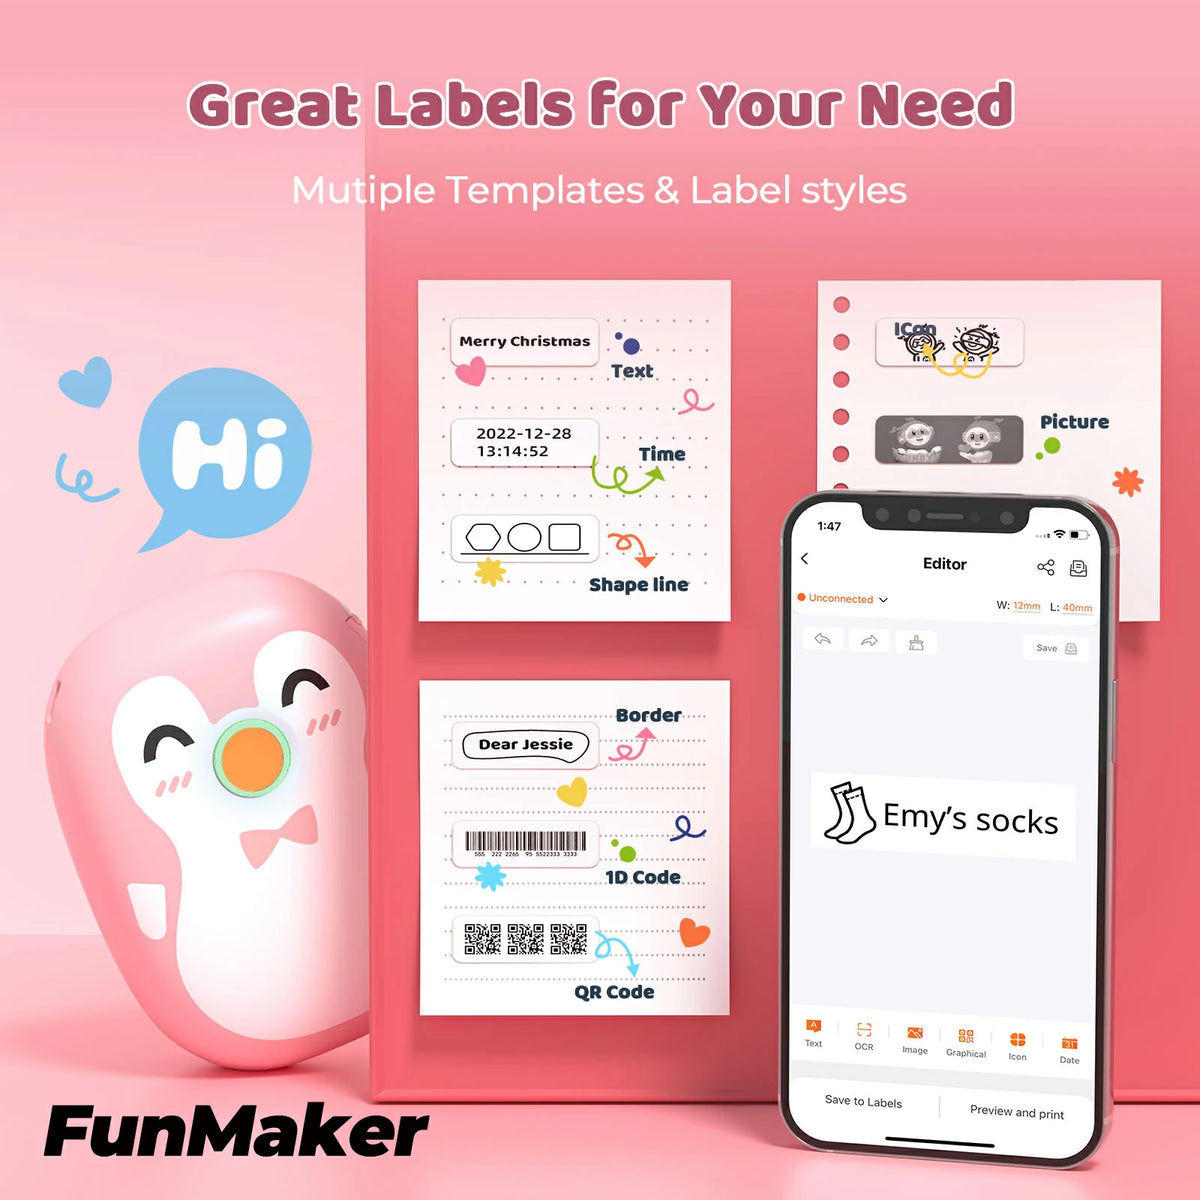 MUNBYN pink Penguin Portable Bluetooth Label Maker Machine has multiple templates and label styles.